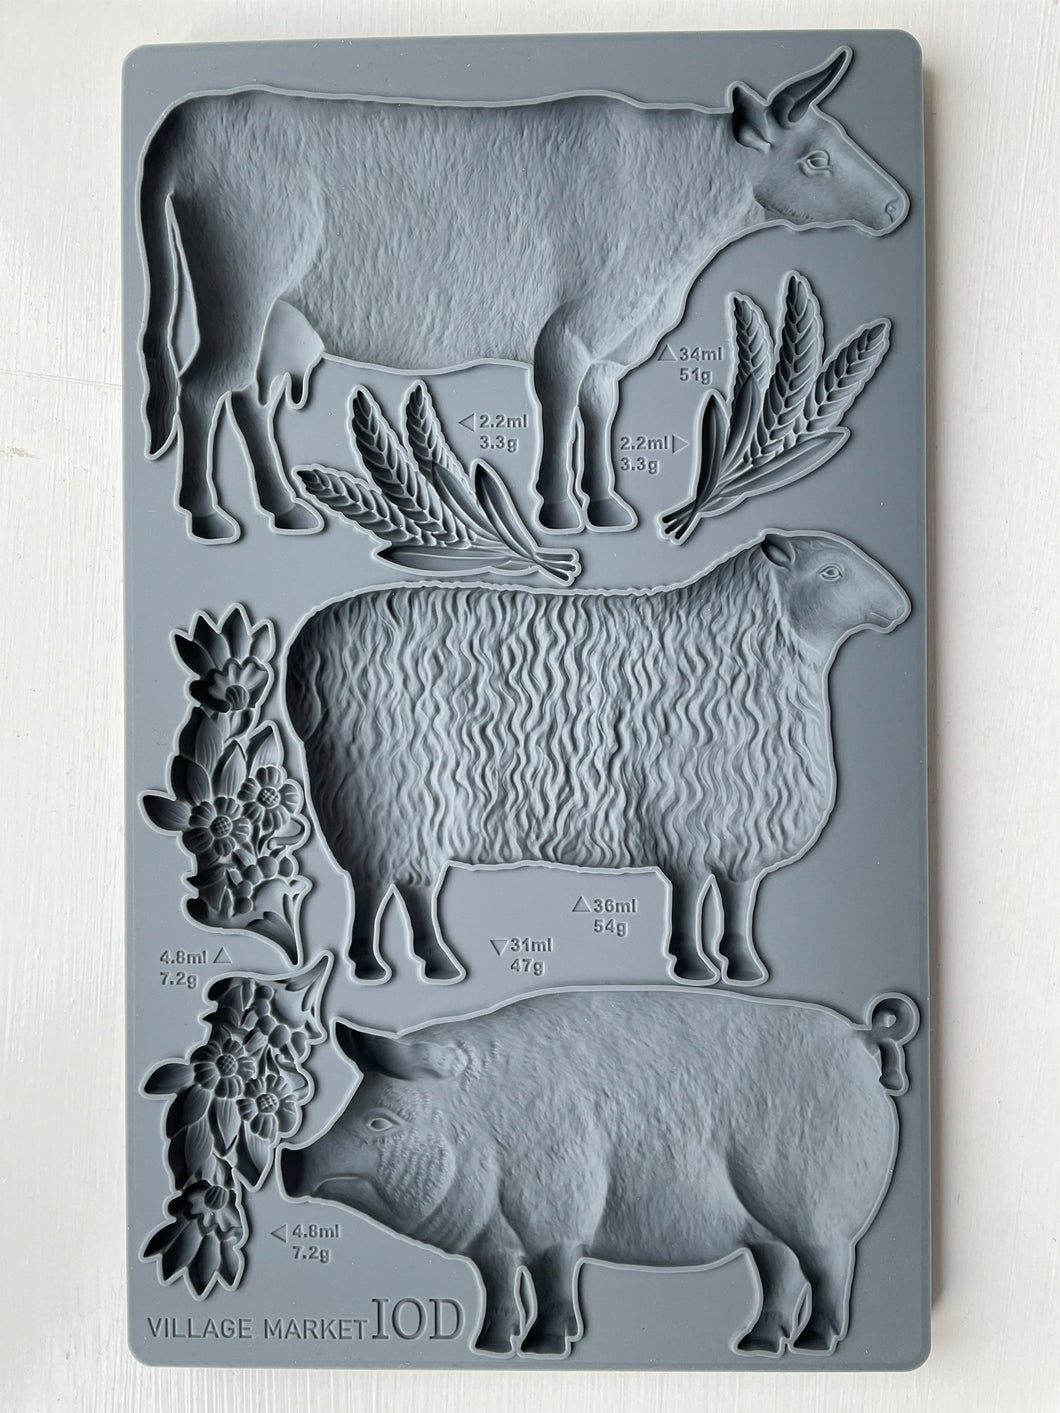 IOD Village Market Mould, Cow, Sheep, Pig, Farmhouse Mold by Iron Orchid Designs